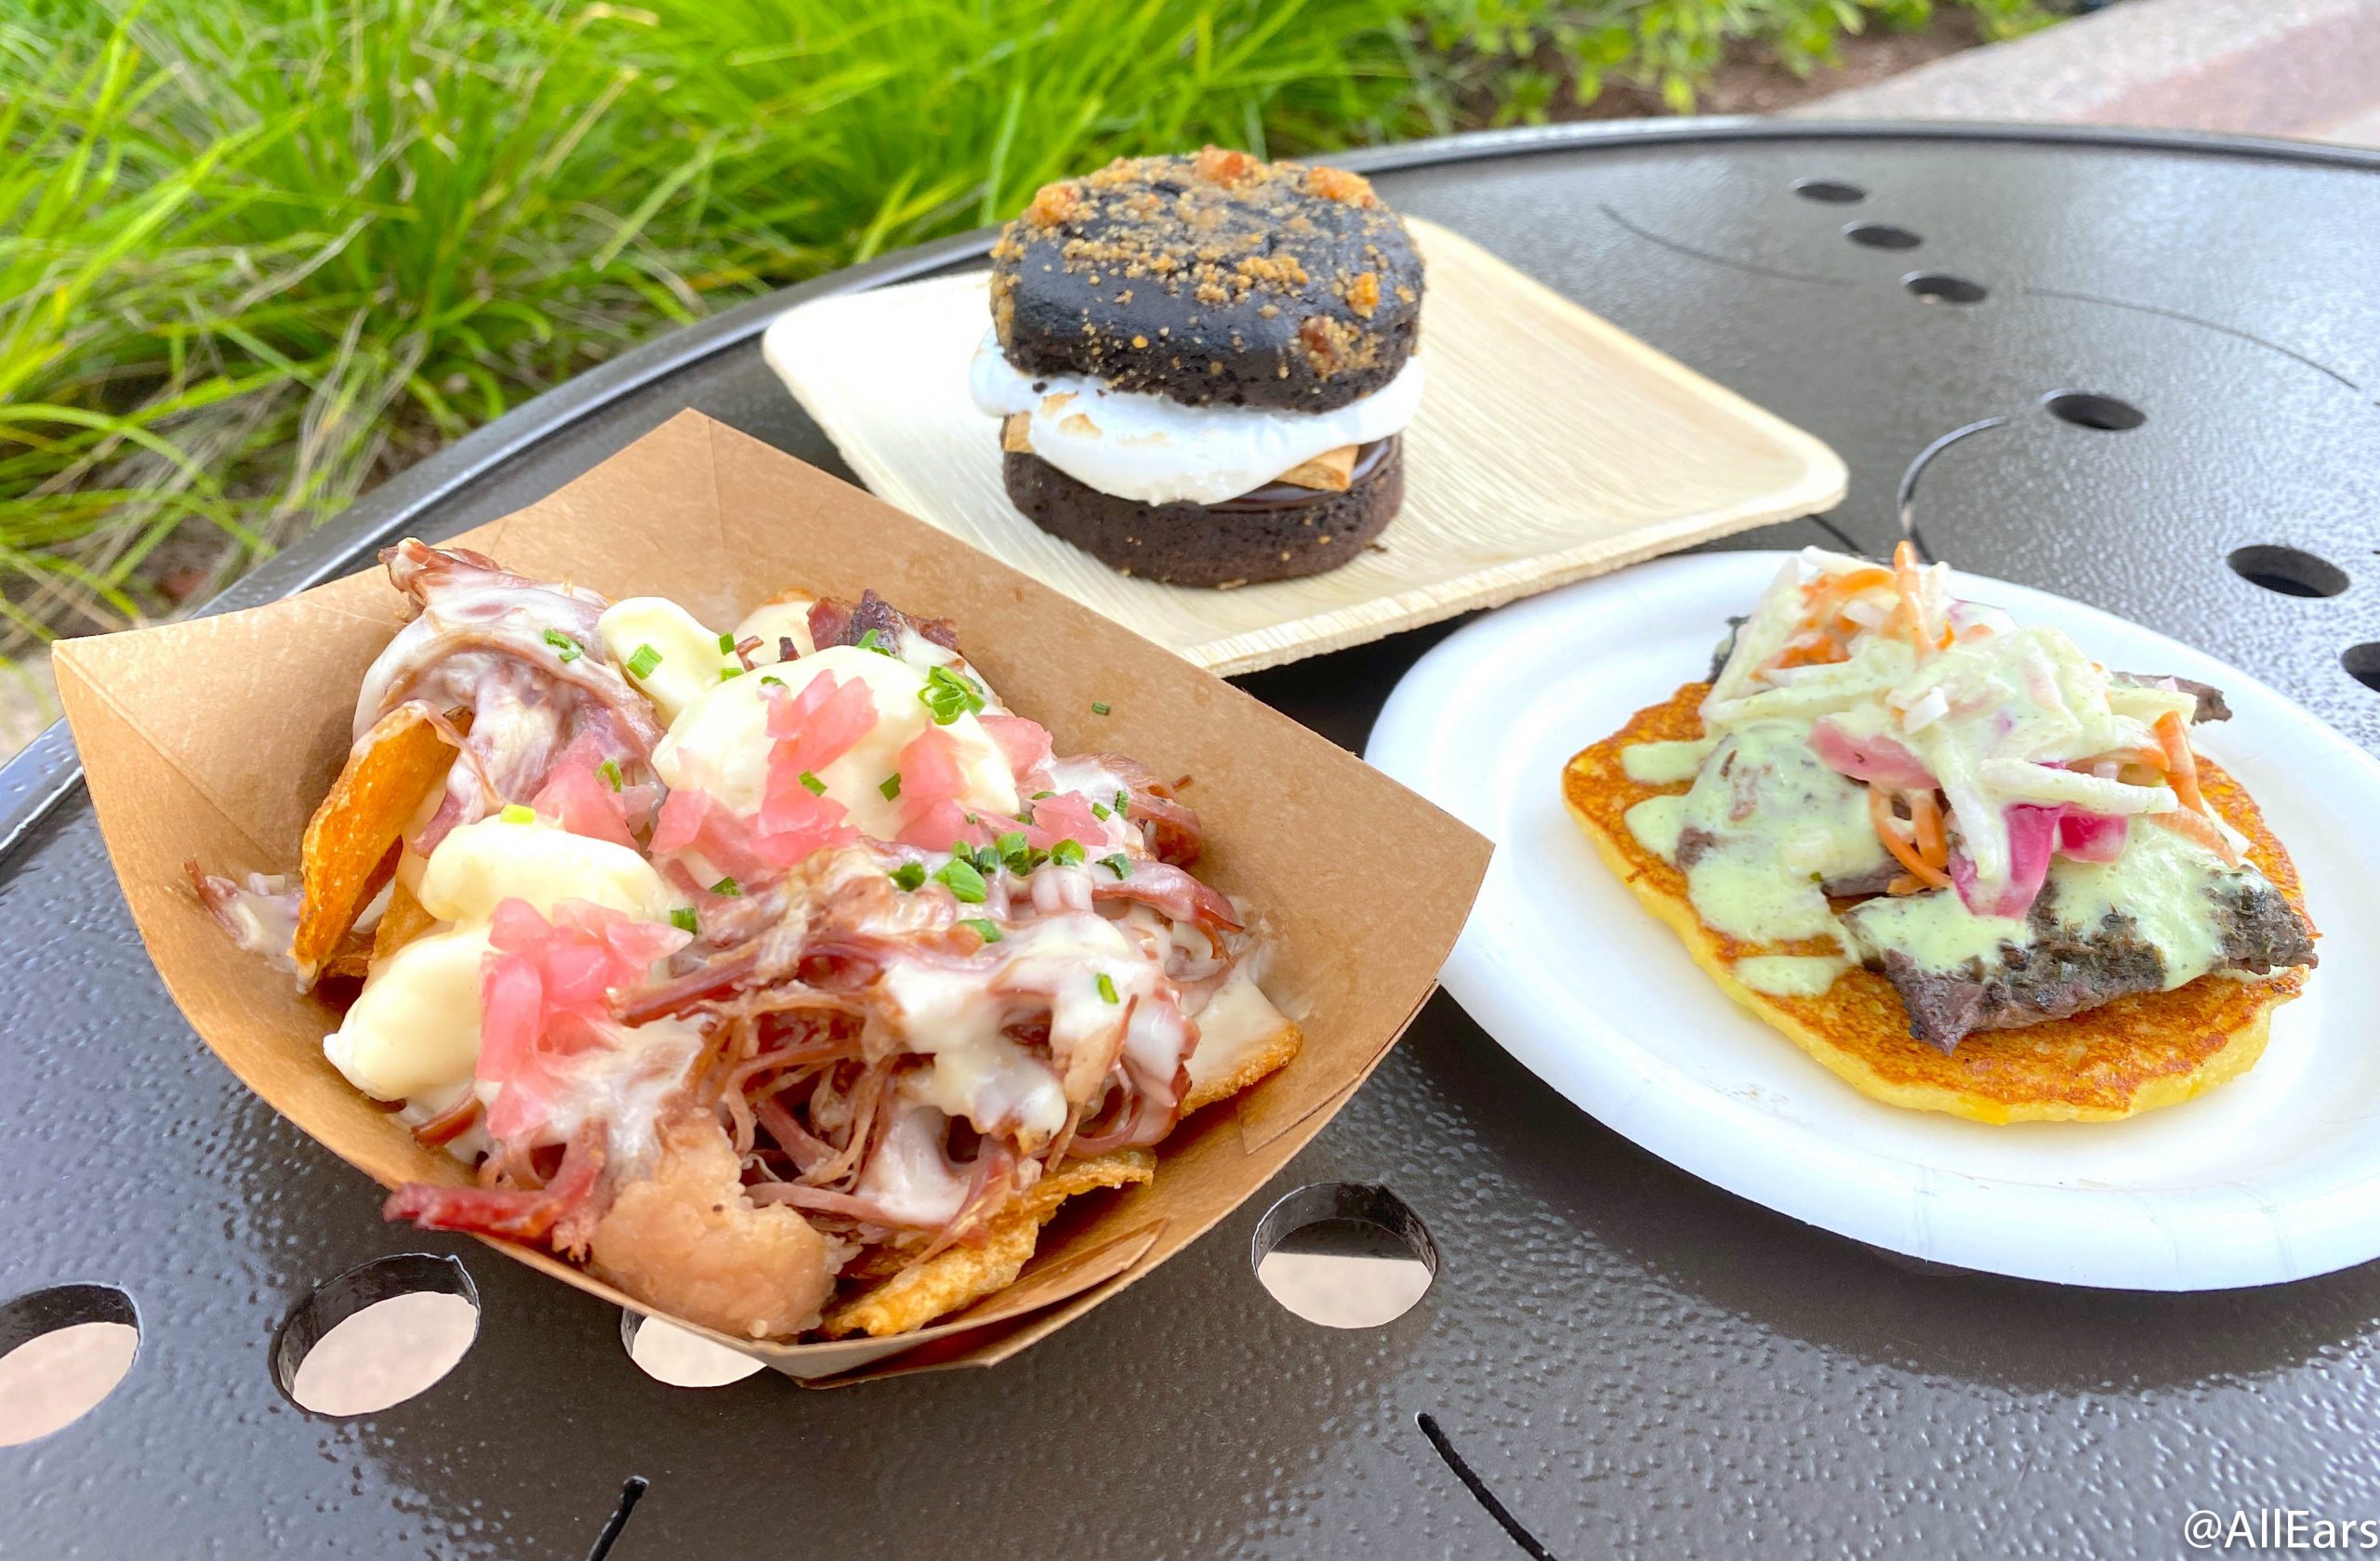 PHOTOS: The Flavors From Fire Booth Has Opened at EPCOT's Taste of Food